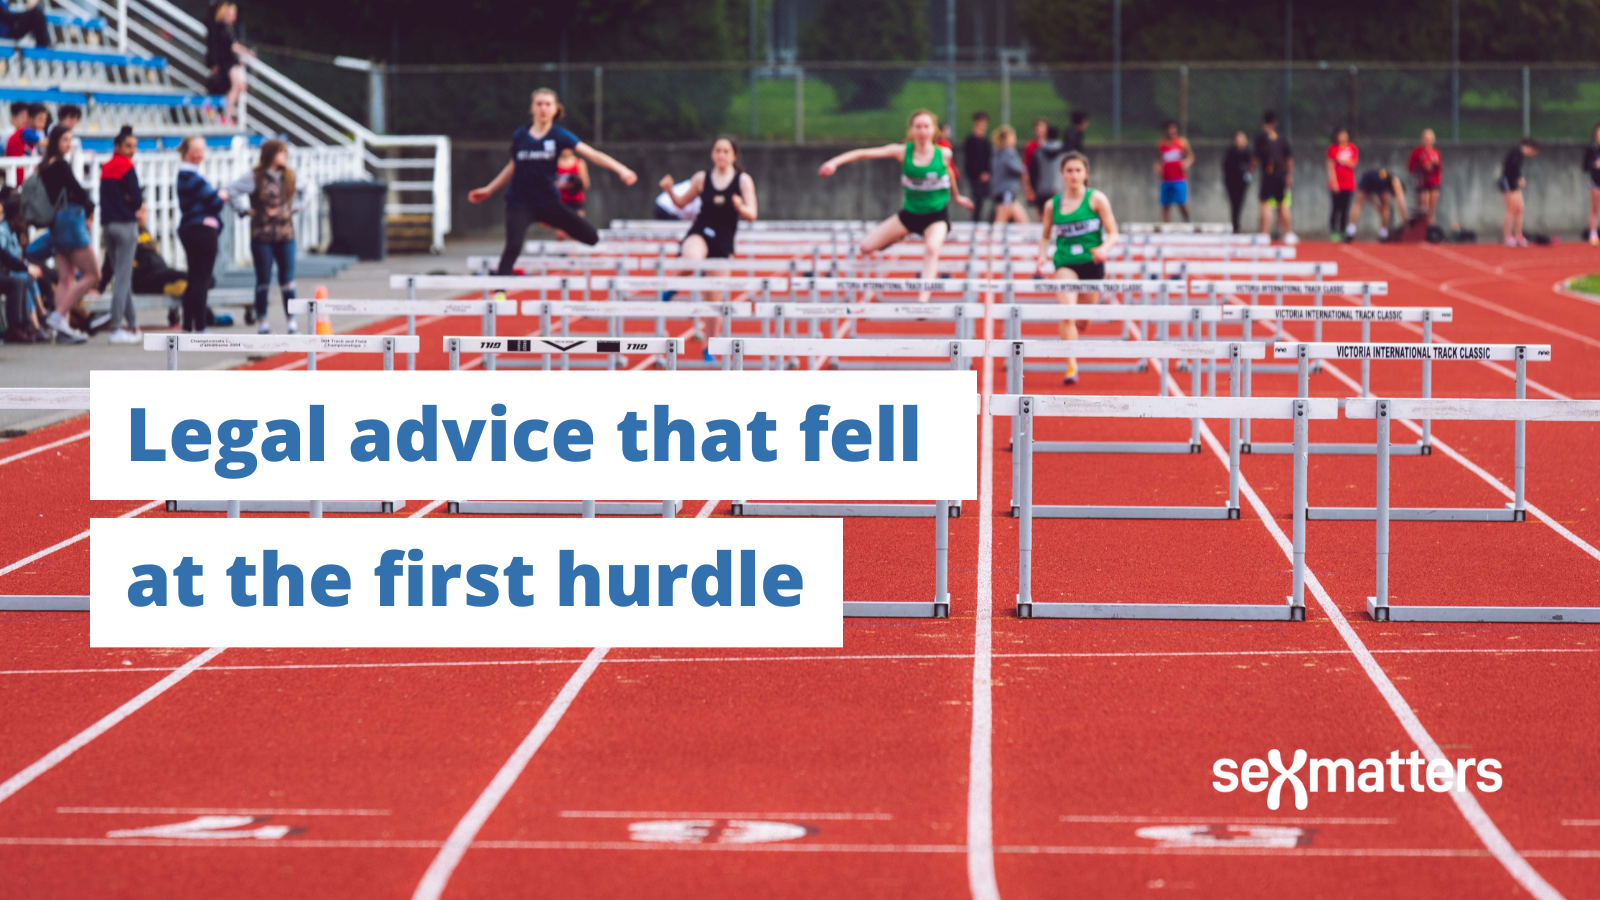 Legal advice that fell at the first hurdle